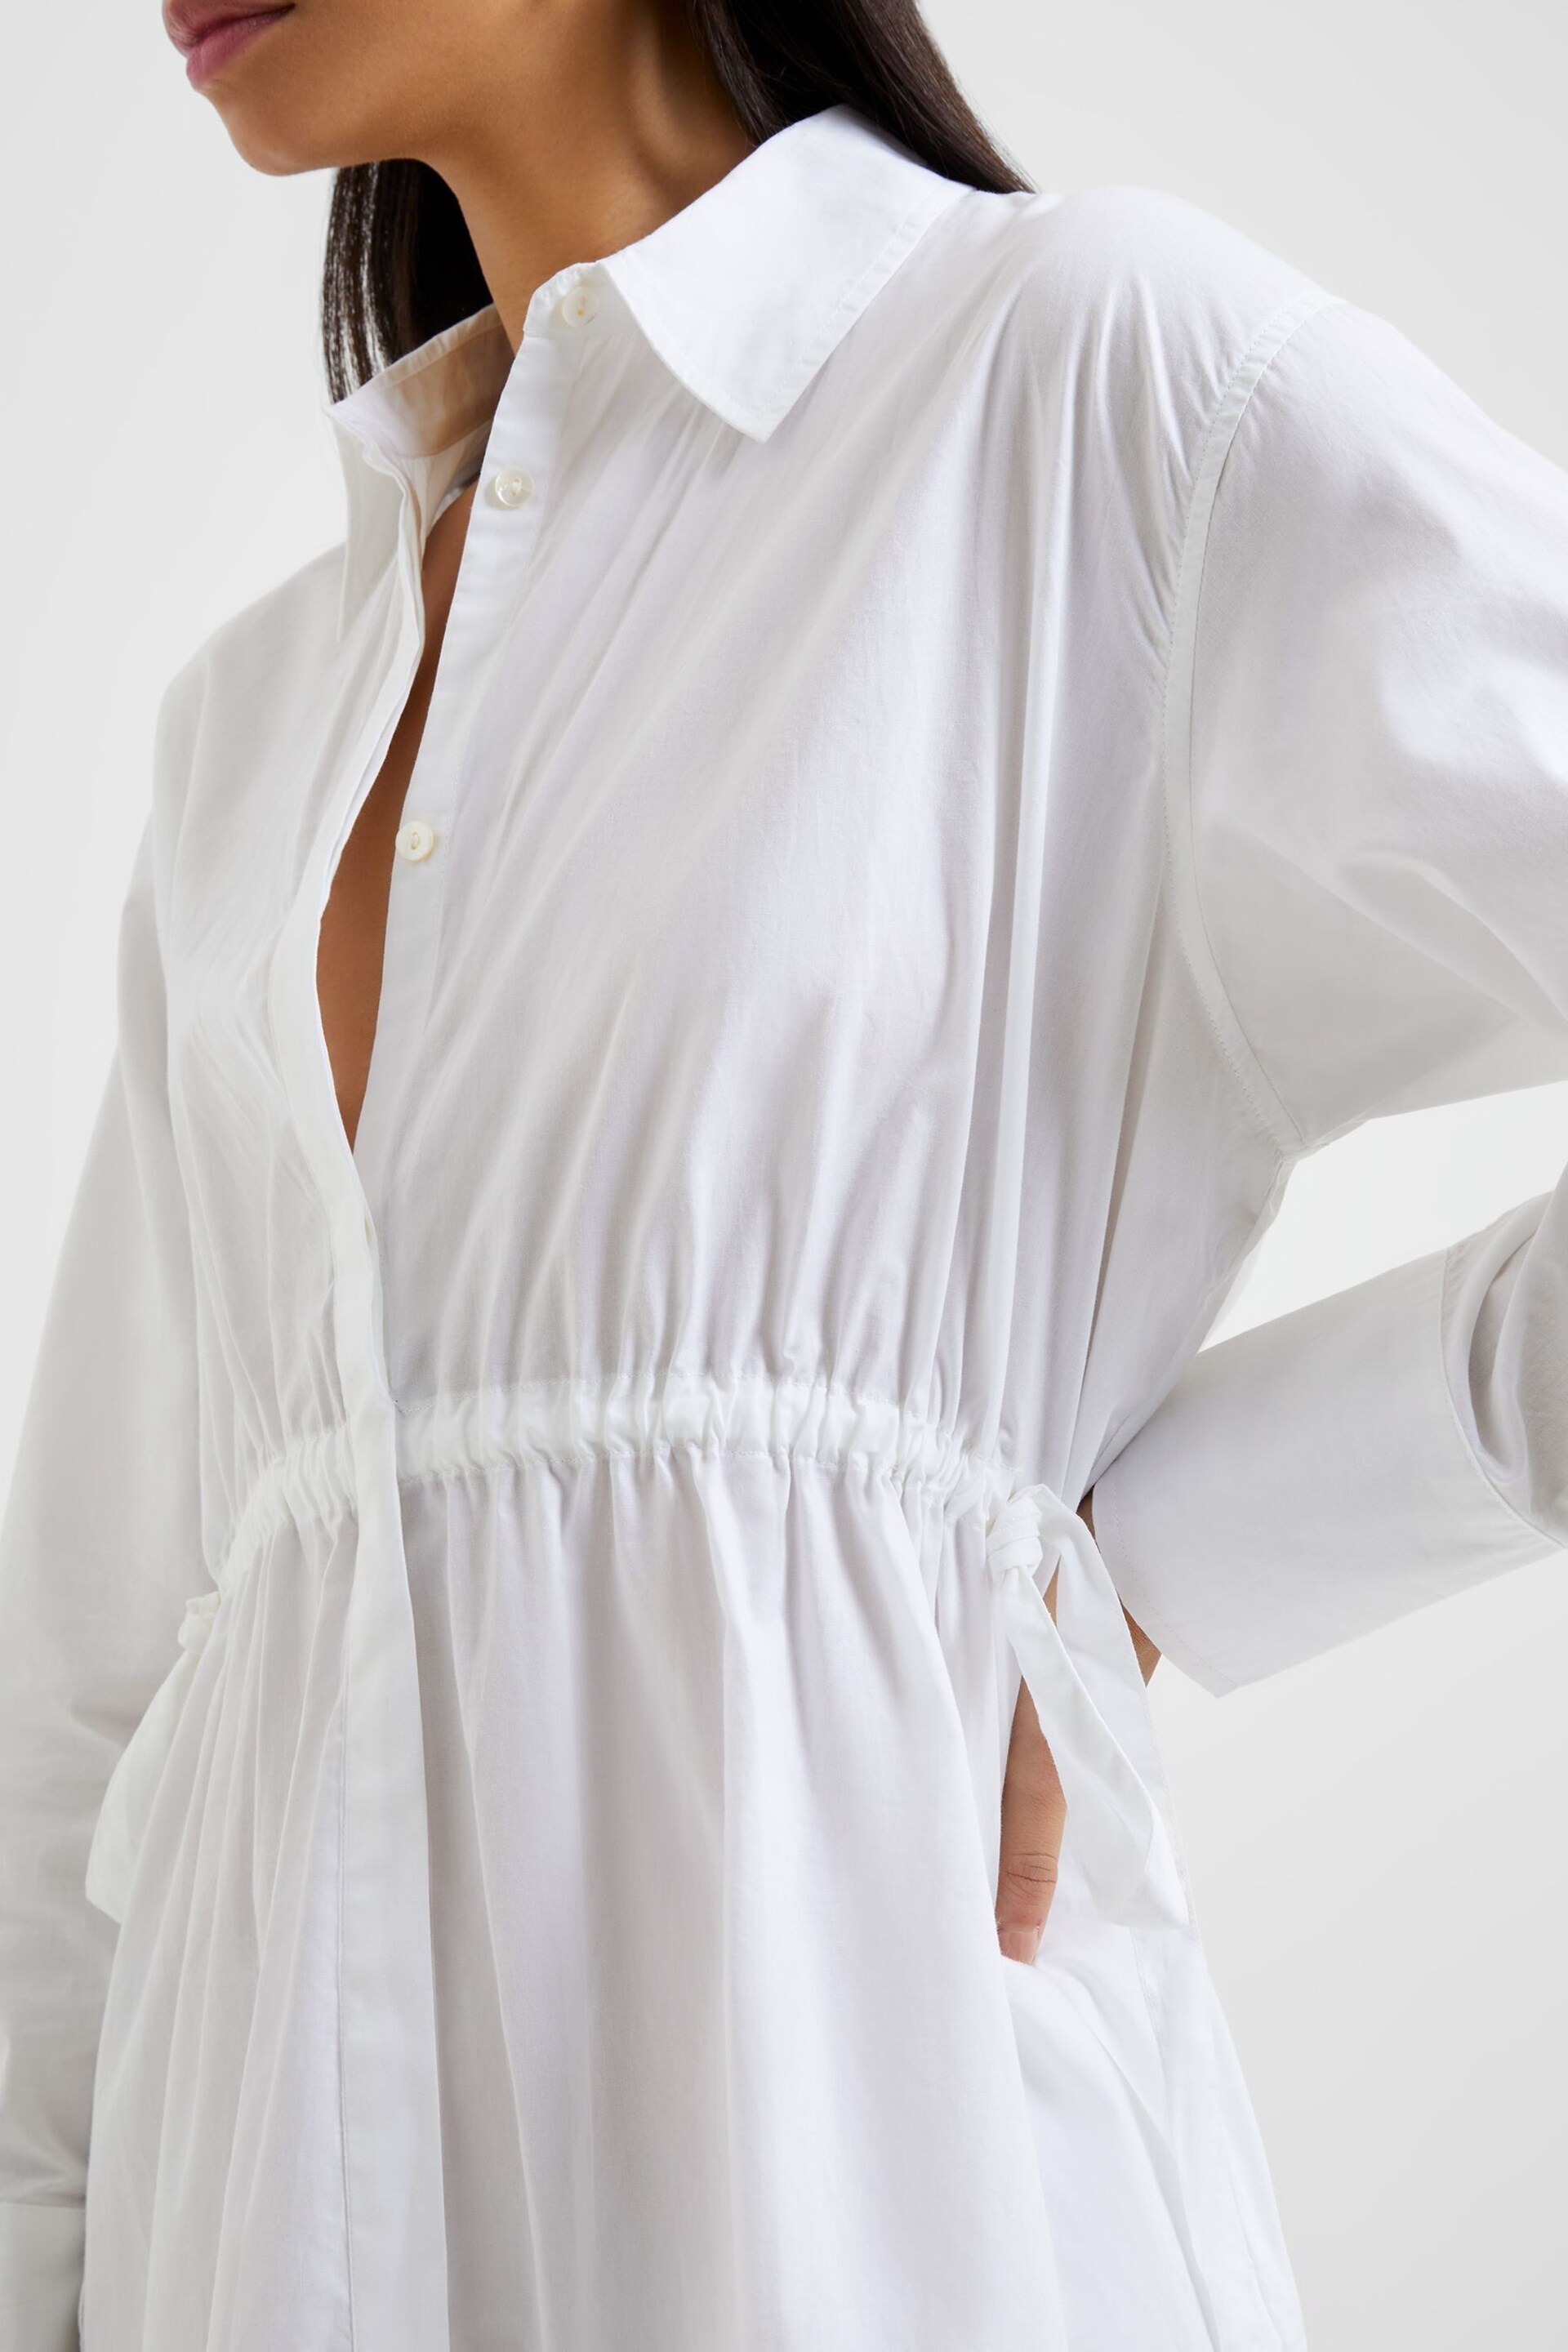 French Connection Rhodes Sust Poplin Shirt Dress - Image 3 of 4